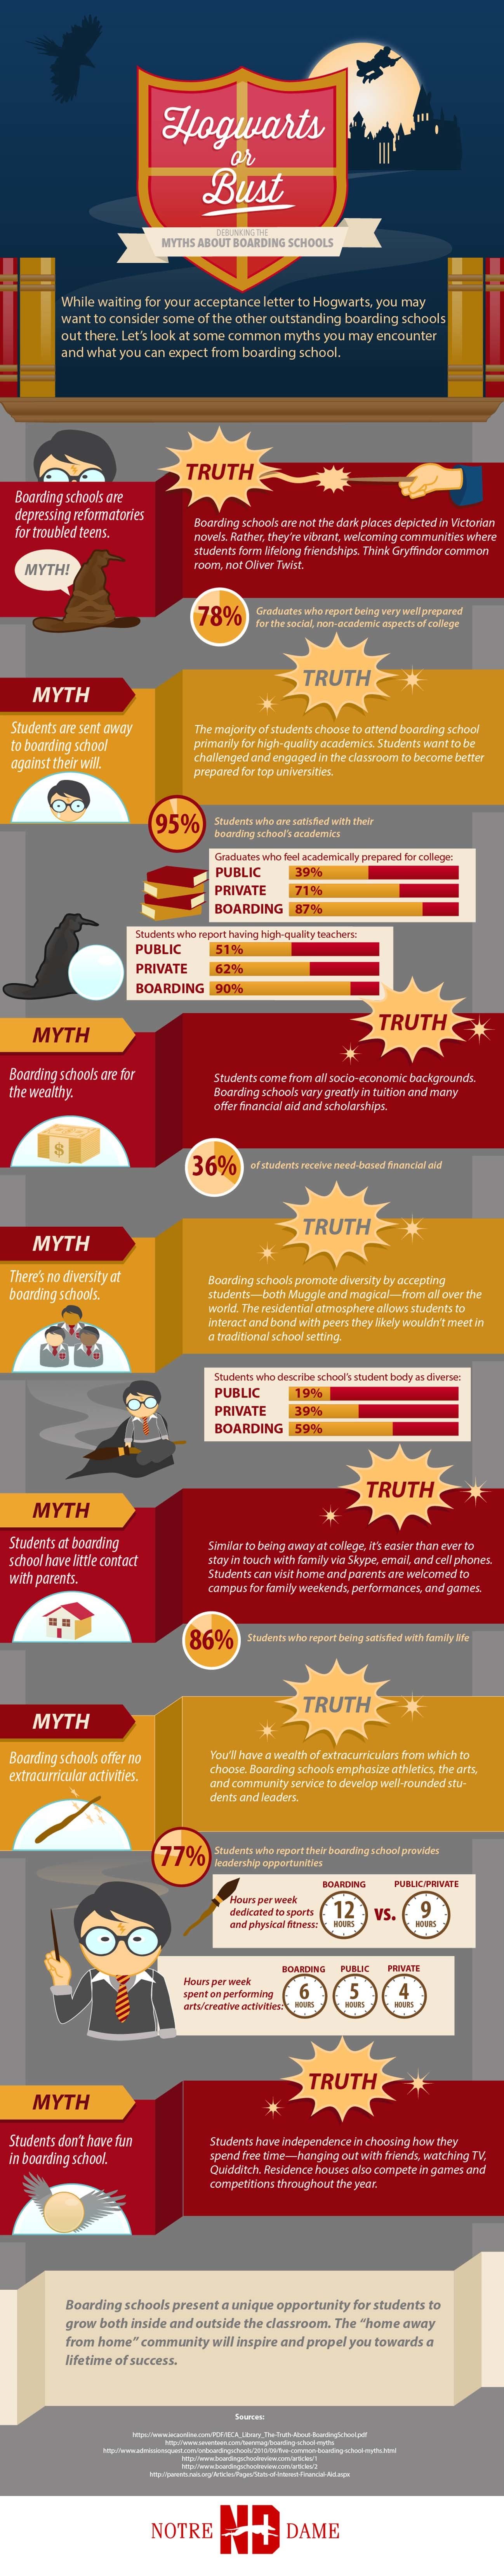 Debunking Myths About Boarding Schools Infographic